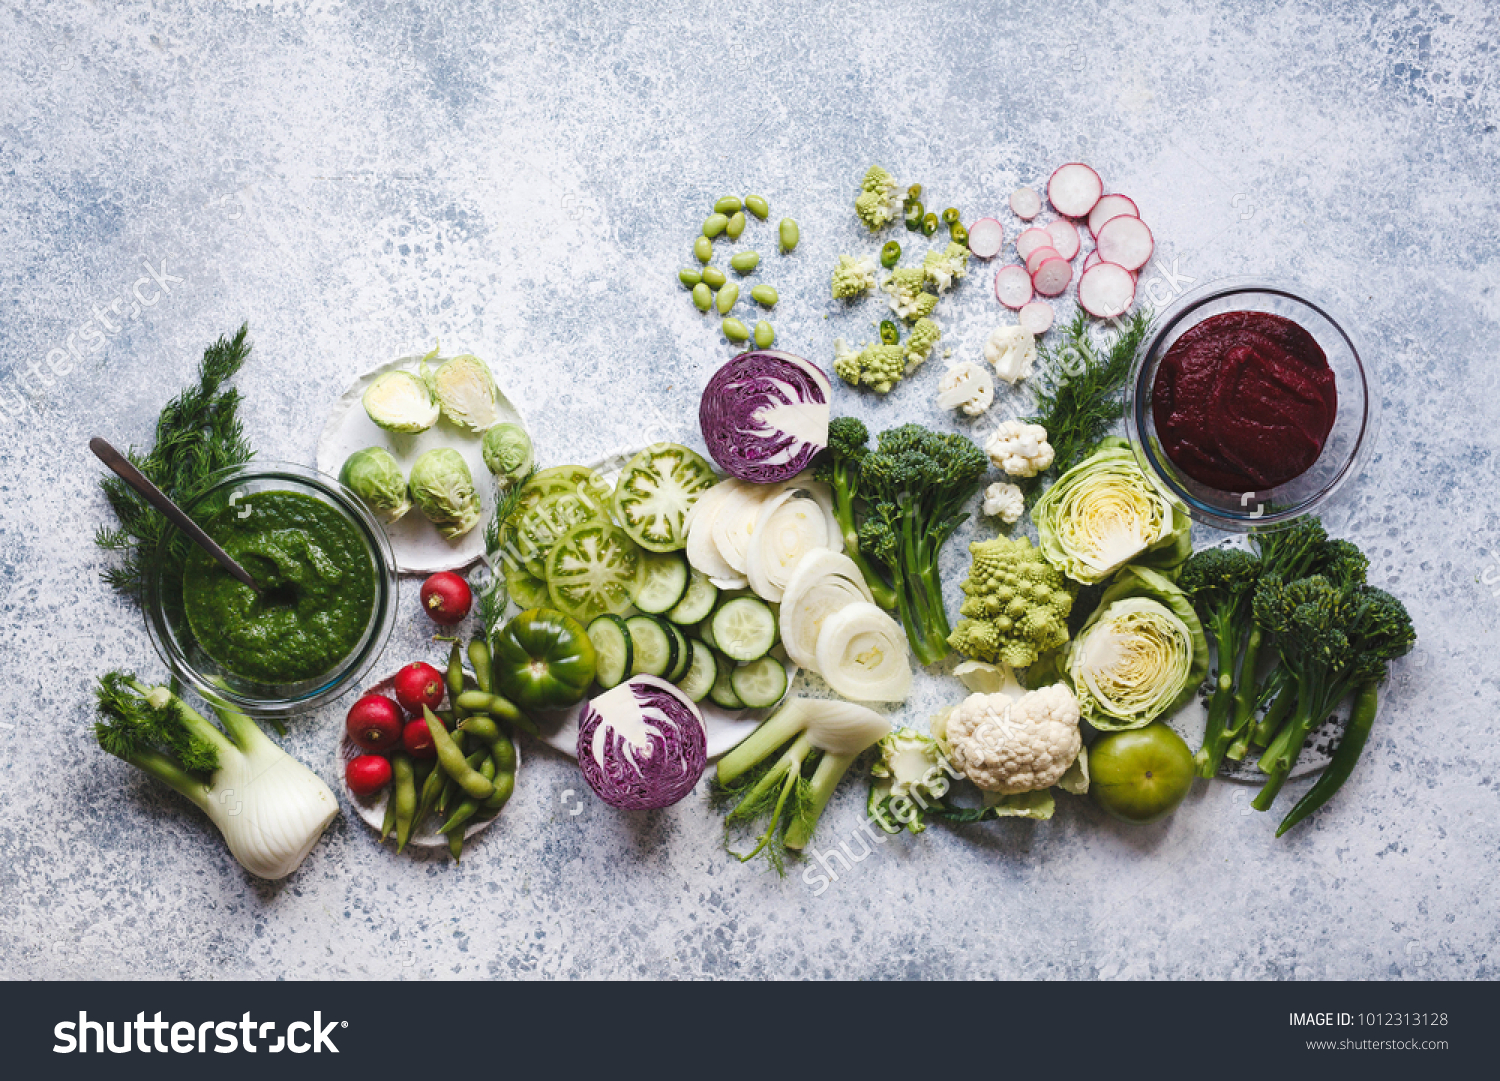 Plant based raw food vegan food cooking background. Flat-lay of fresh vegetables, greens, smoothie bowl superfoods o top view, copy space. Clean eating, alkaline diet, vegetarian concept #1012313128